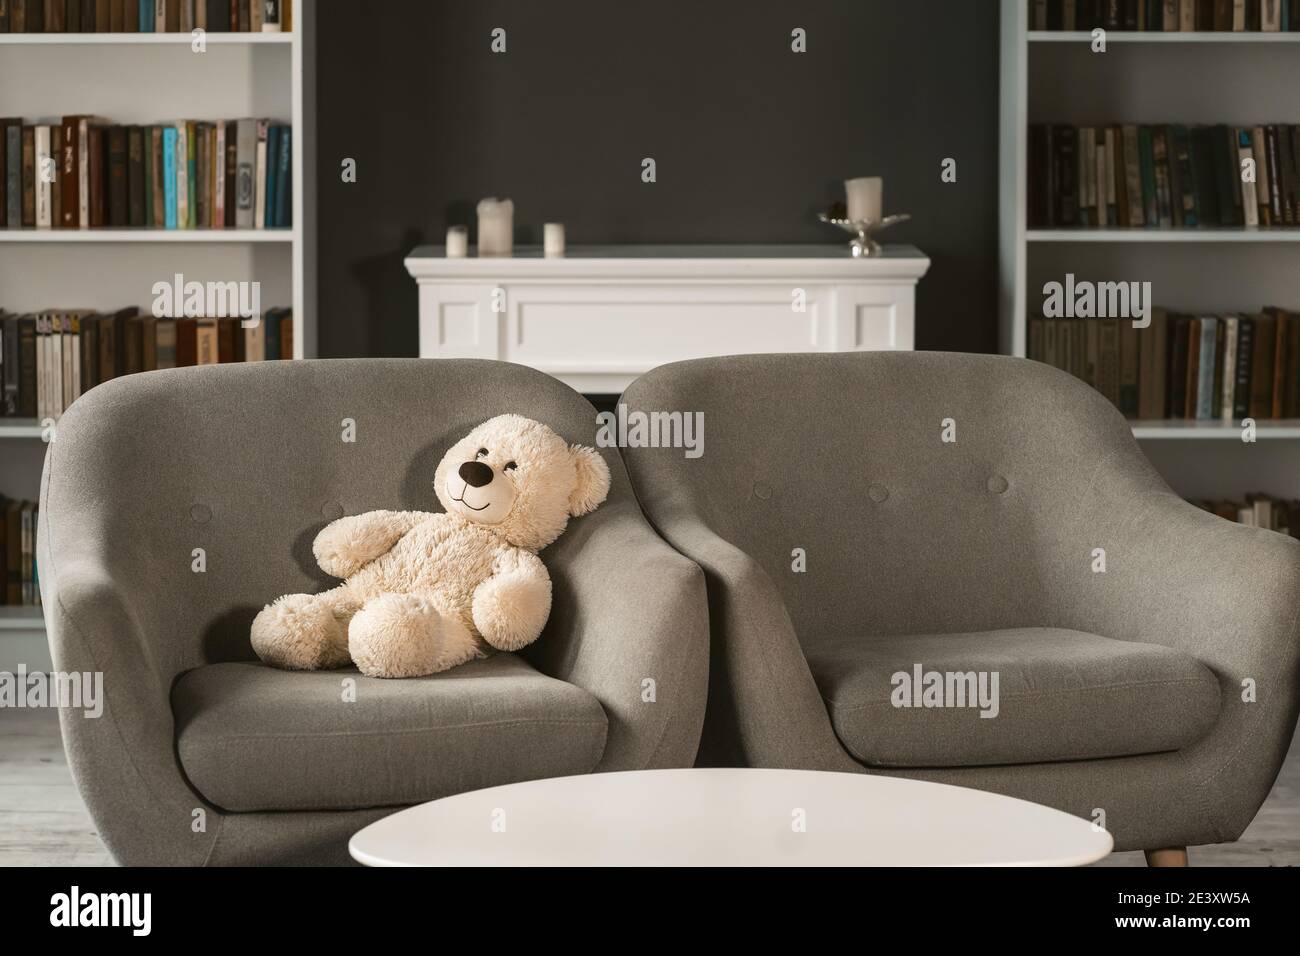 Bear Grey Plush Bear Sofa Chairs Animals Arm Chairs Nurseries and Bedrooms Decoation for Christmas Birthday Holiday Gift 